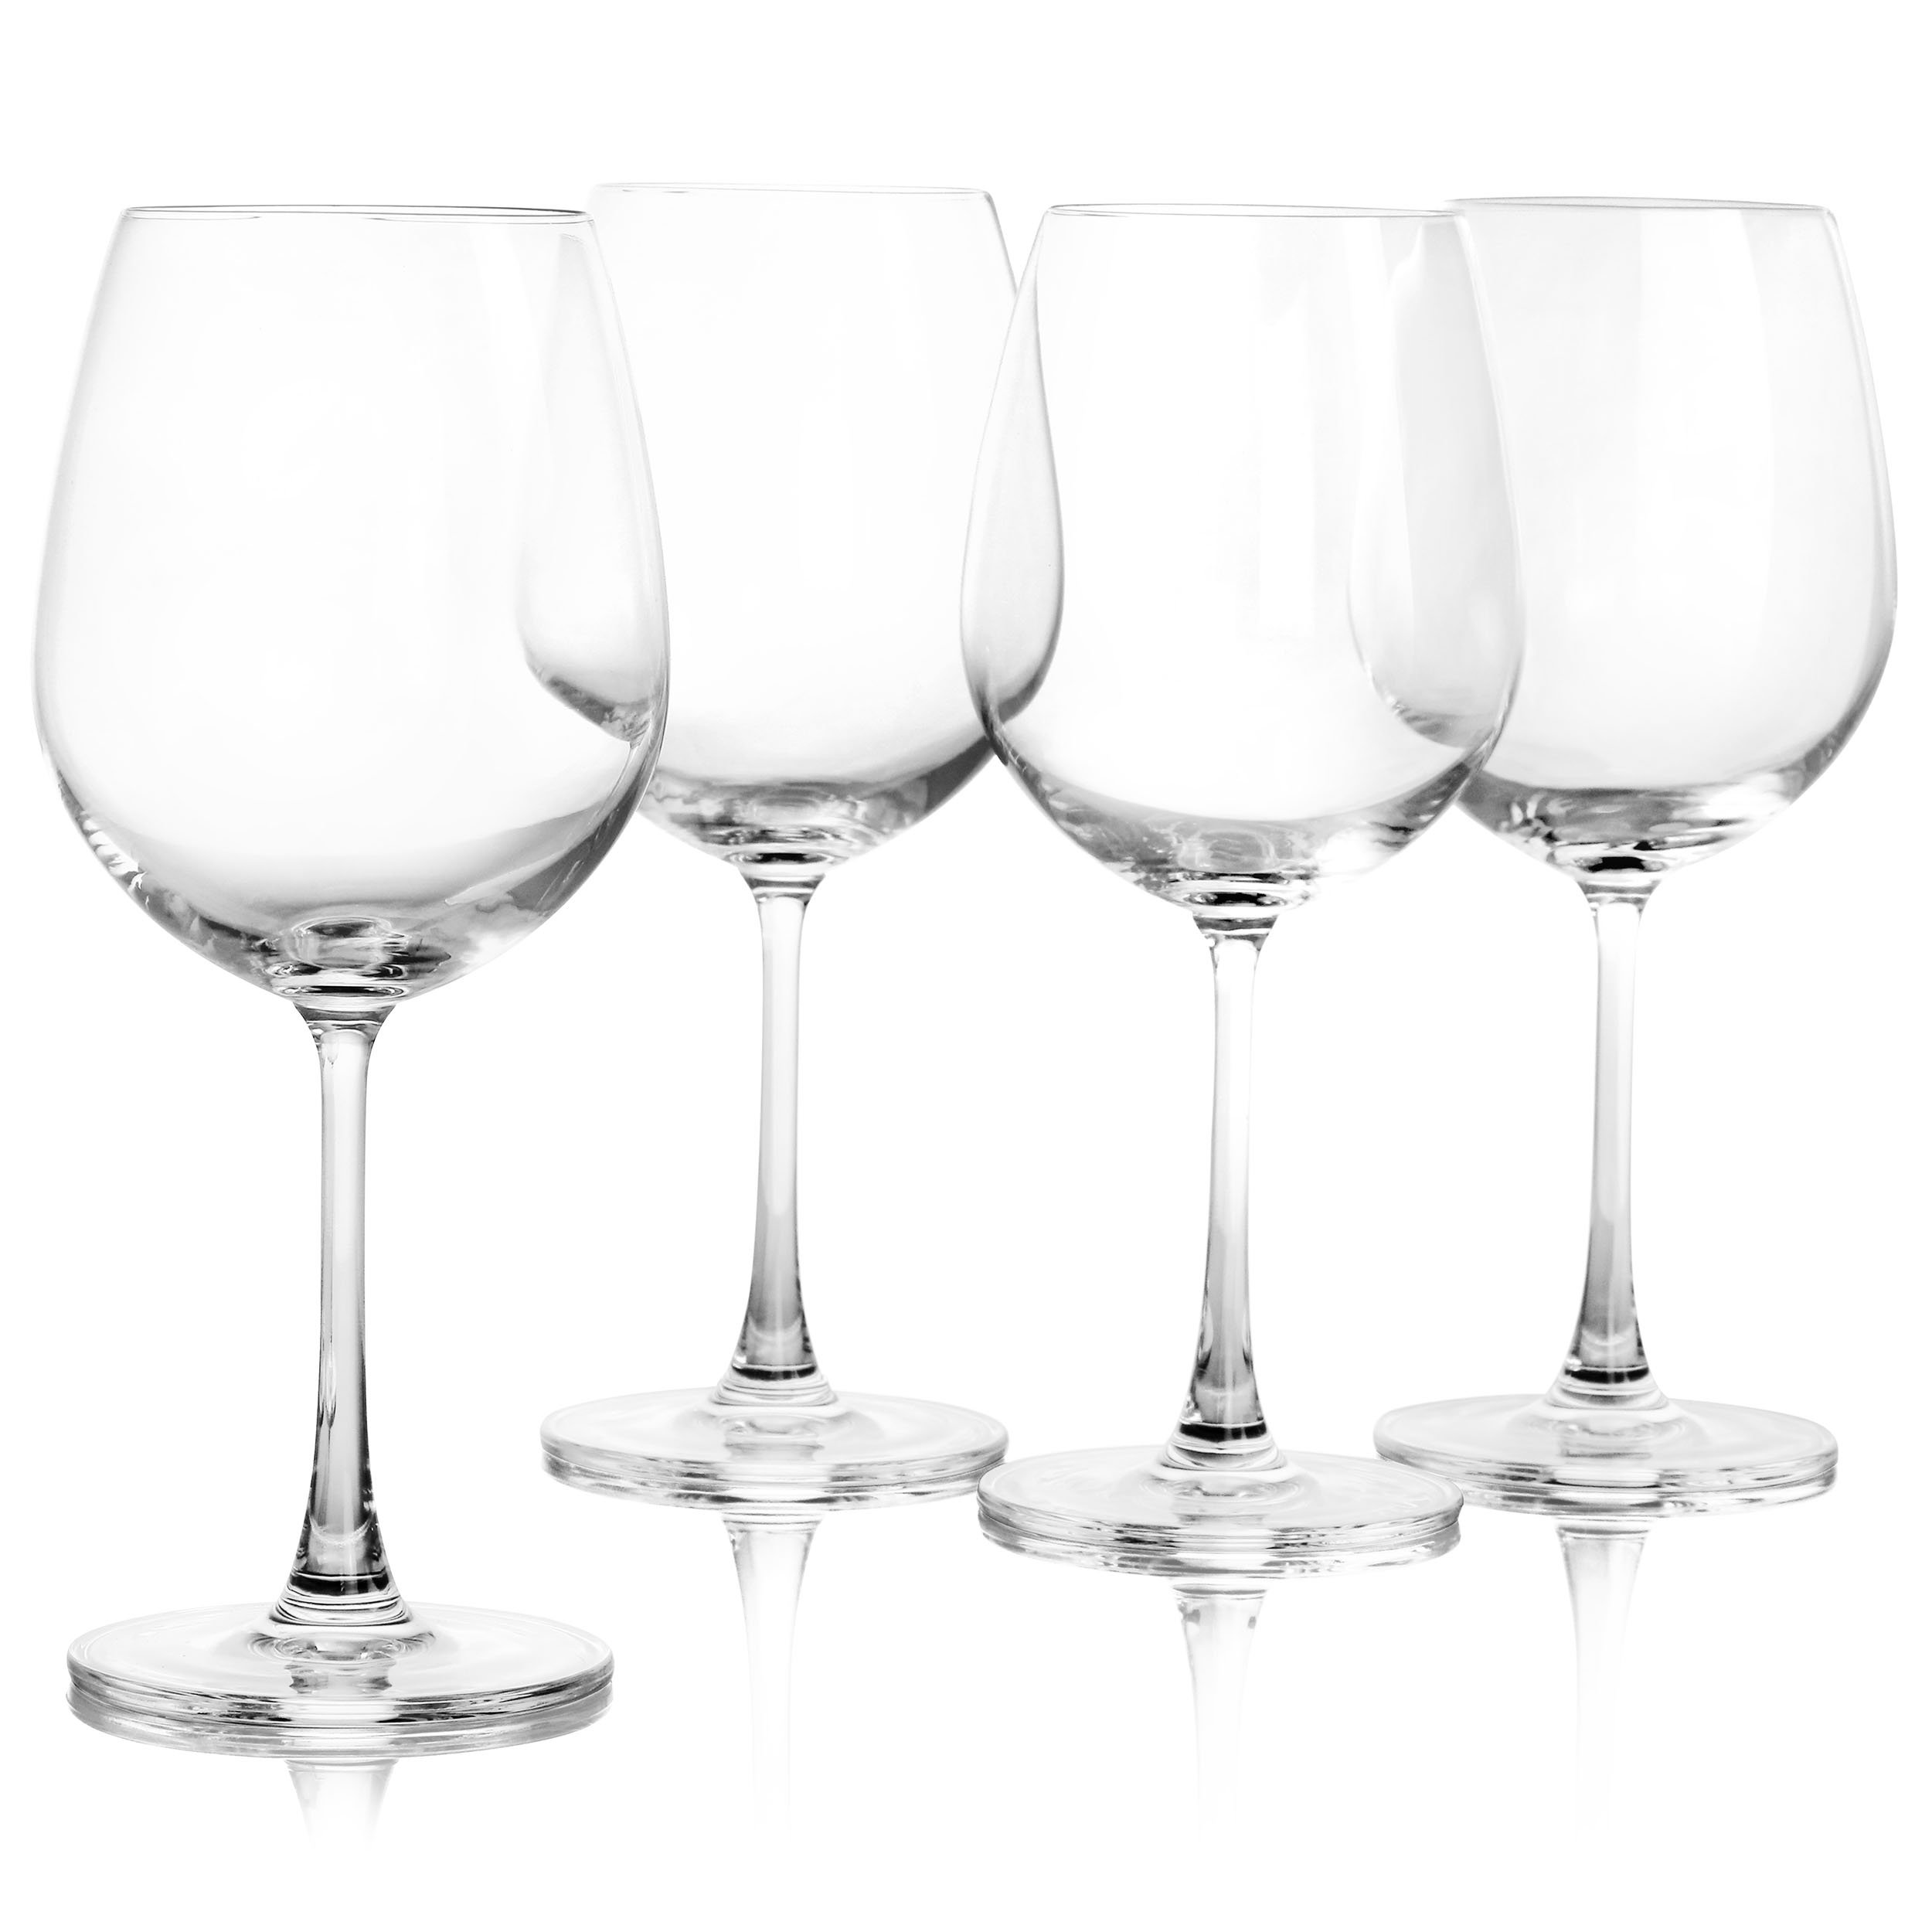 Comfort In A Glass®, Red Wine Glasses, Set of 4